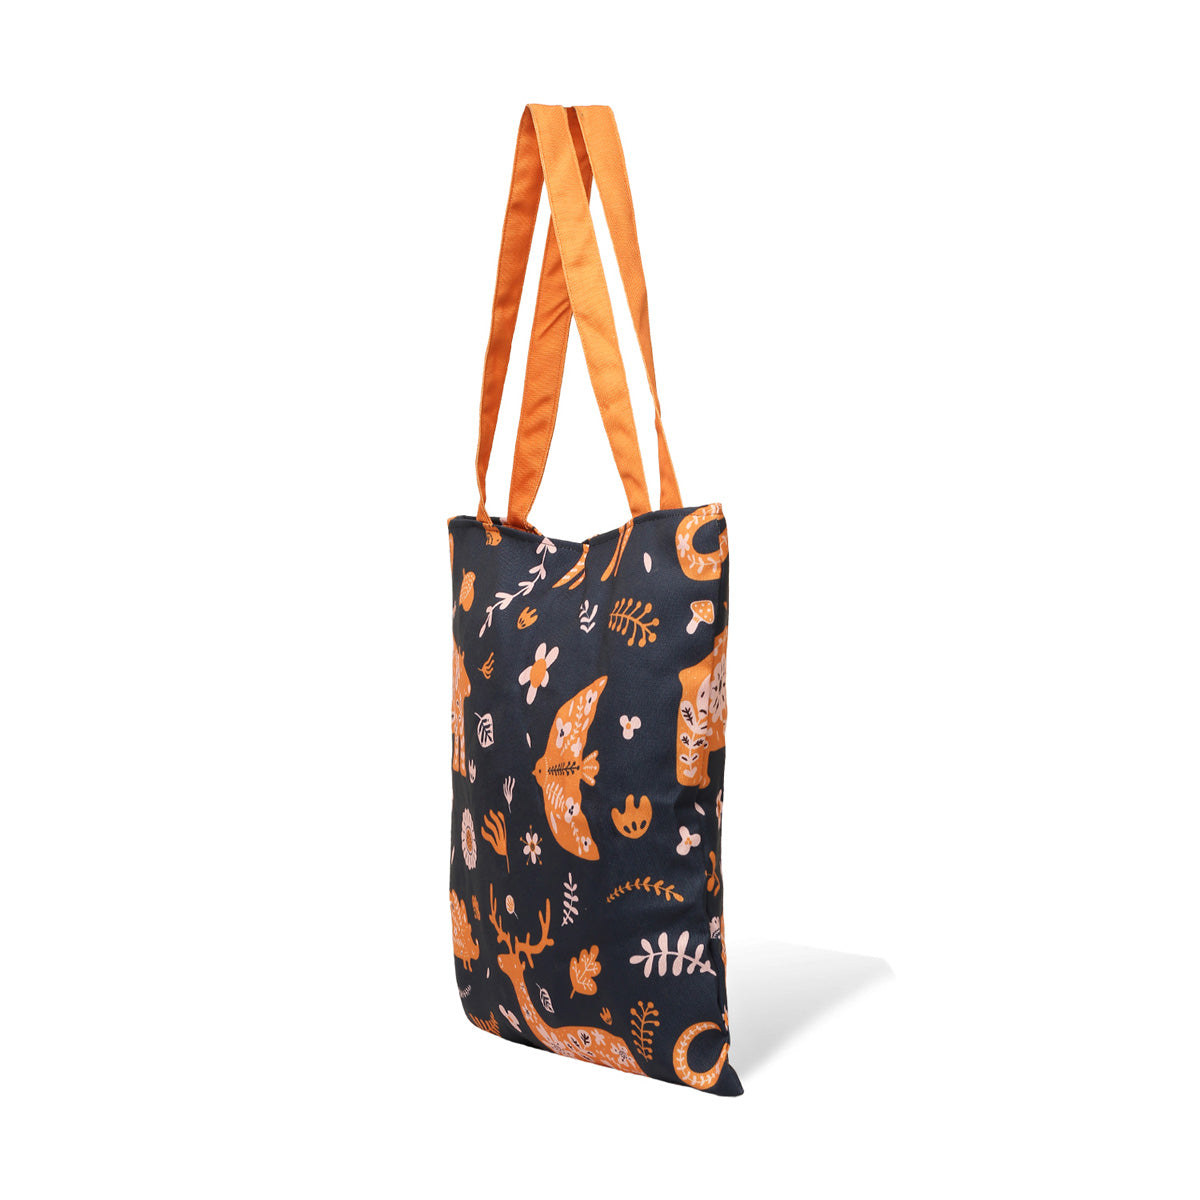 Side view of  A black tote bag with orange and white animal and plant print designs, featuring deer, fish, and flowers, with orange handles.